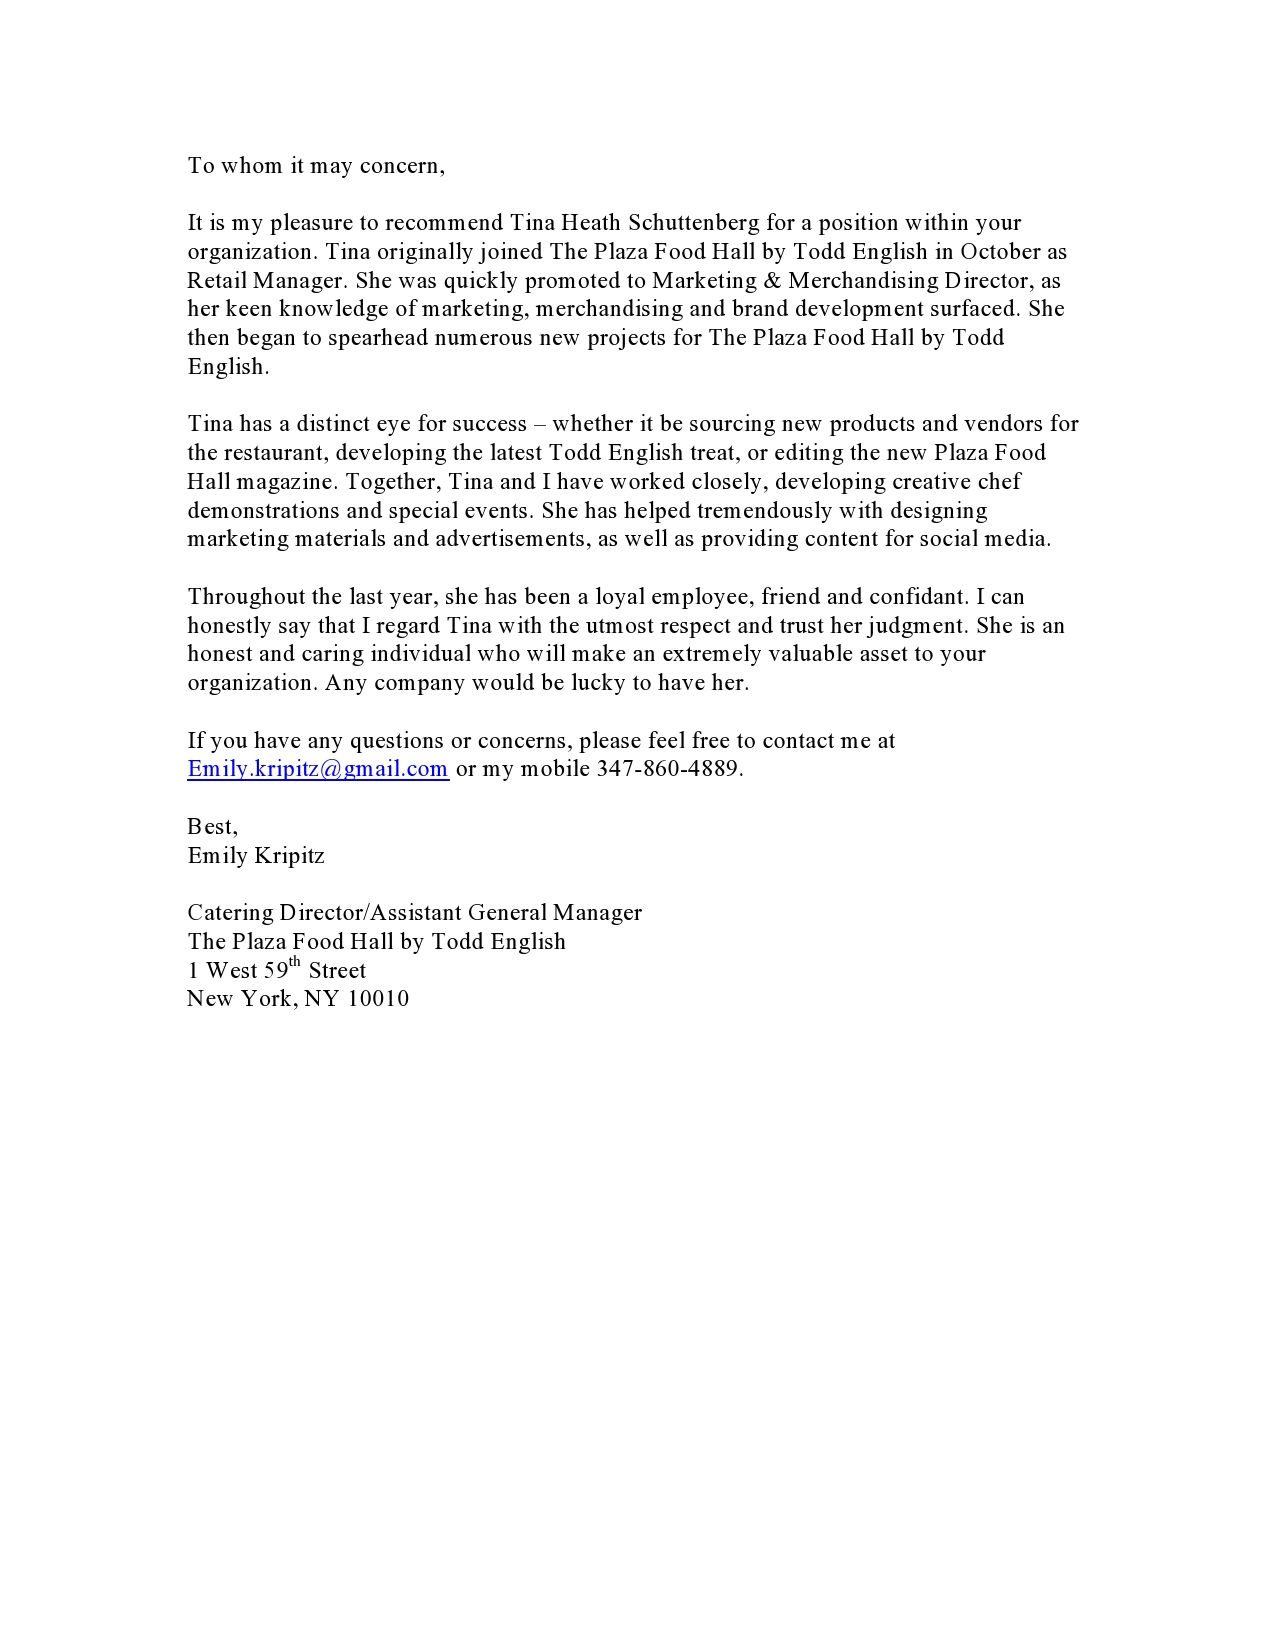 Reference Letter From Emily Former Catering Director At Todd with dimensions 1275 X 1650